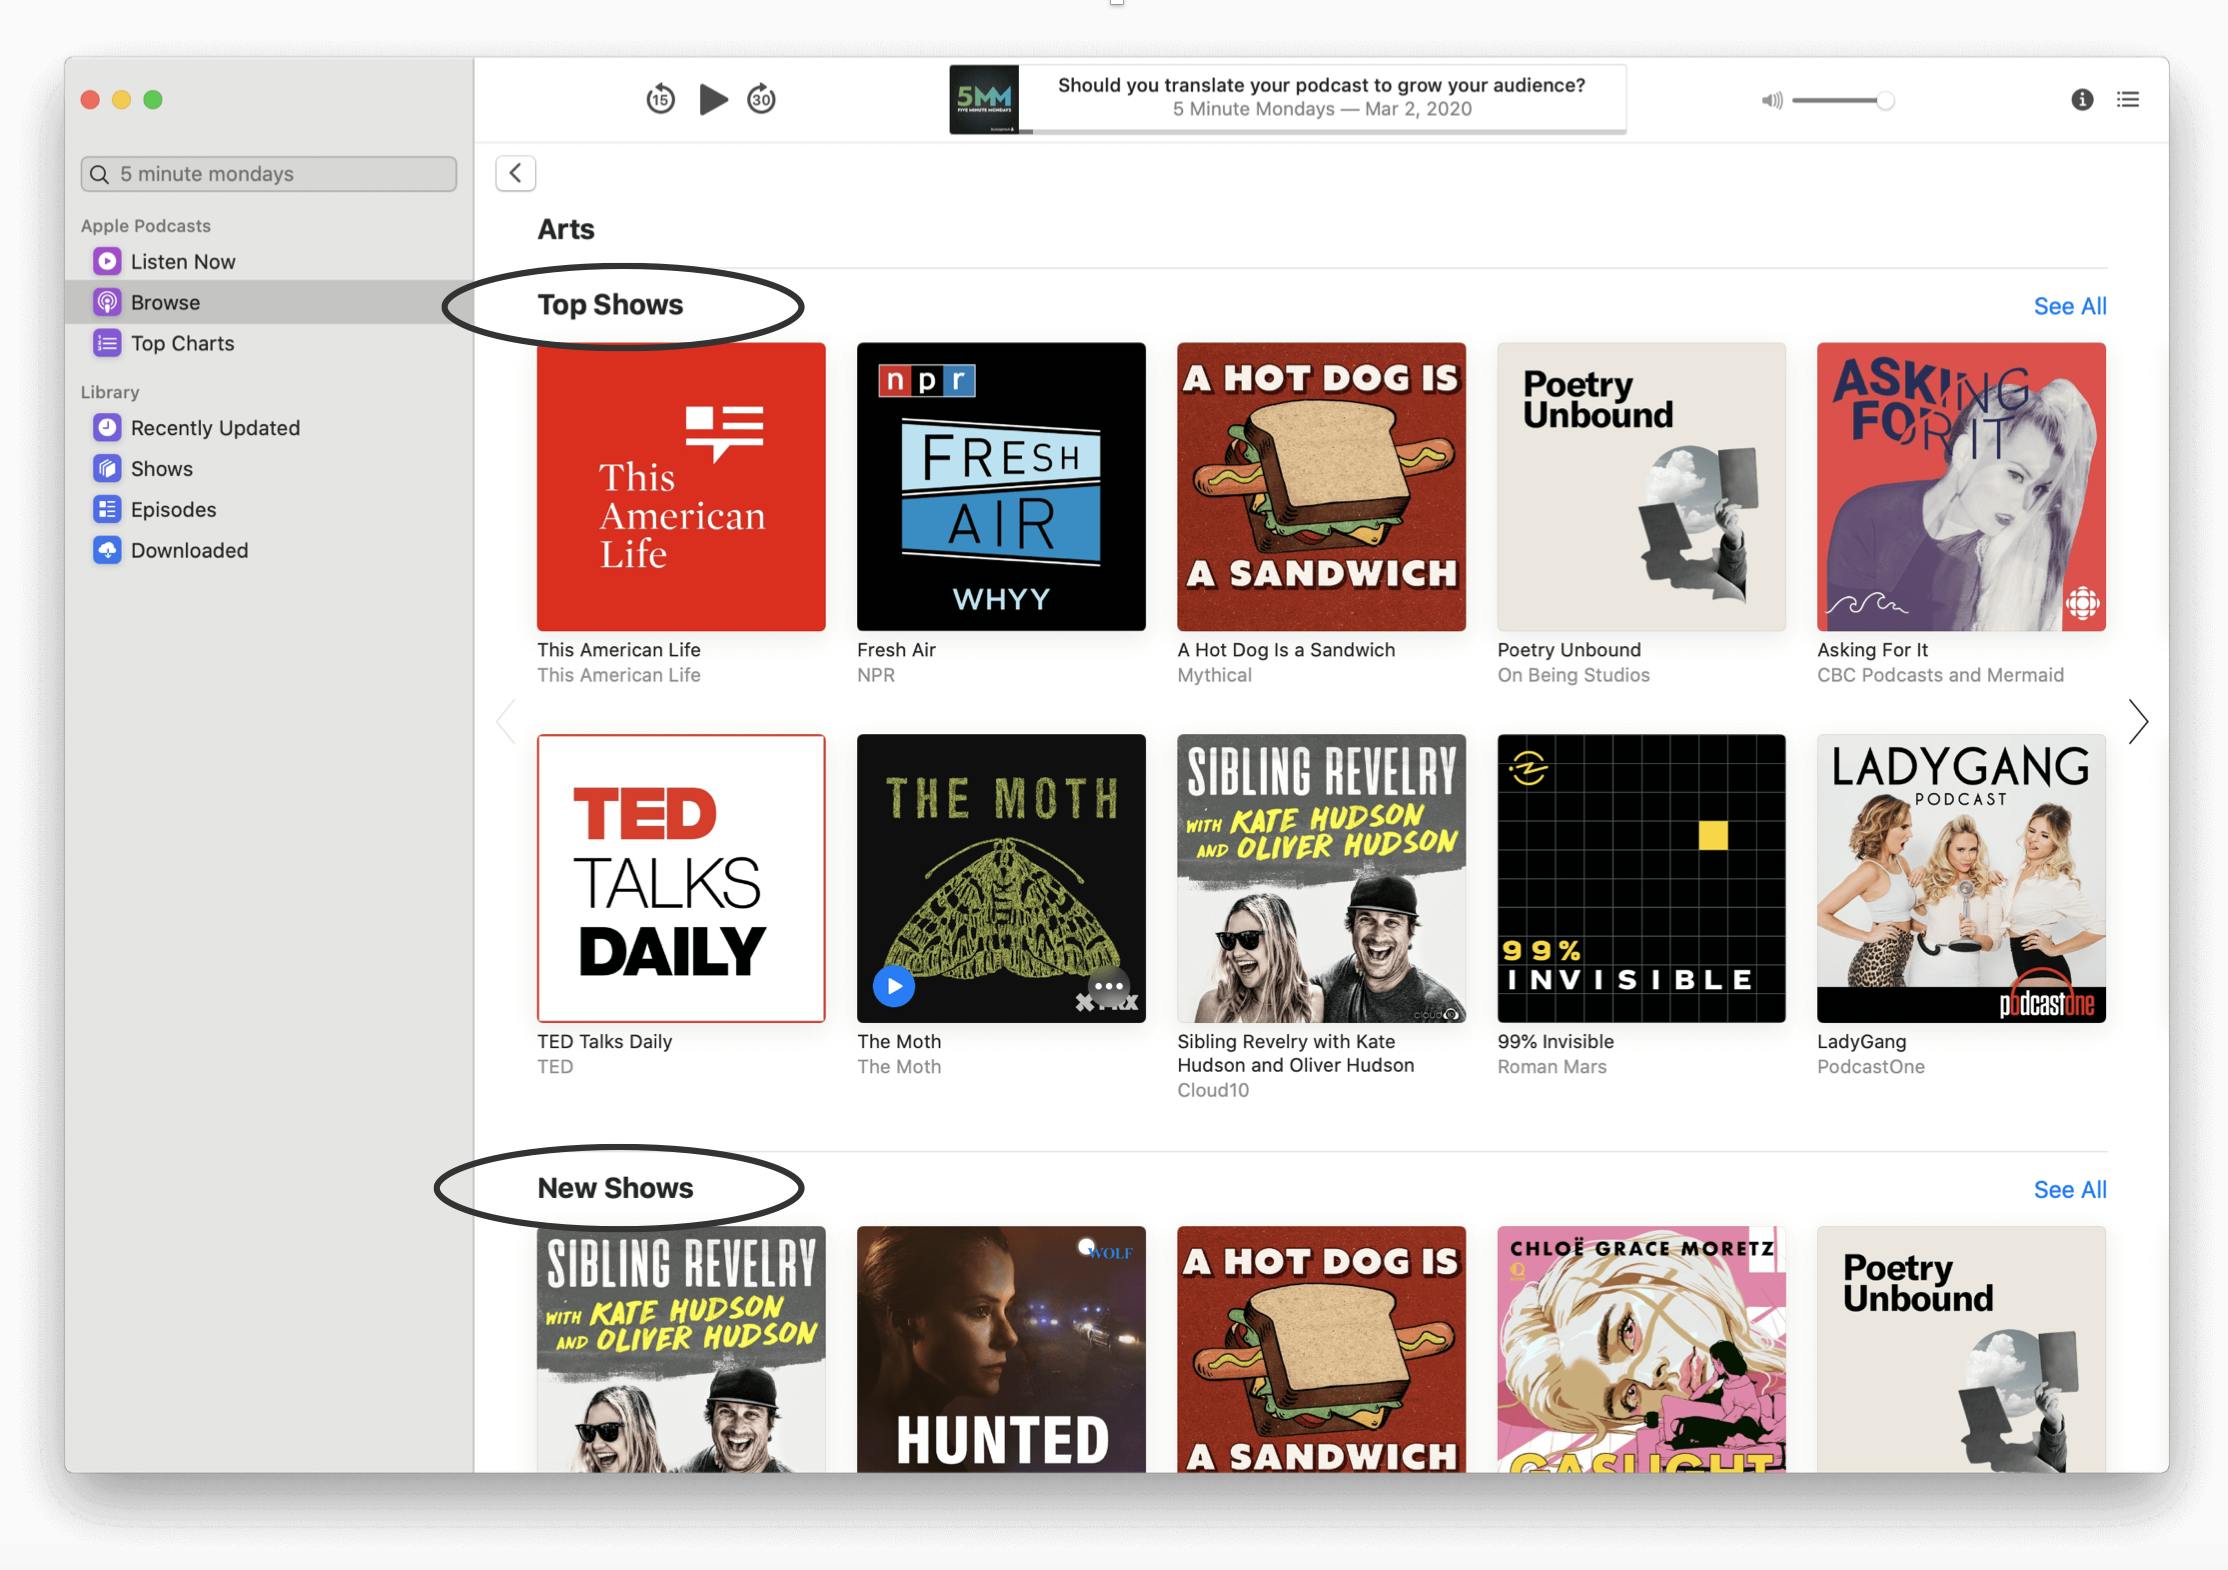 Subcategories circled within Apple Podcasts